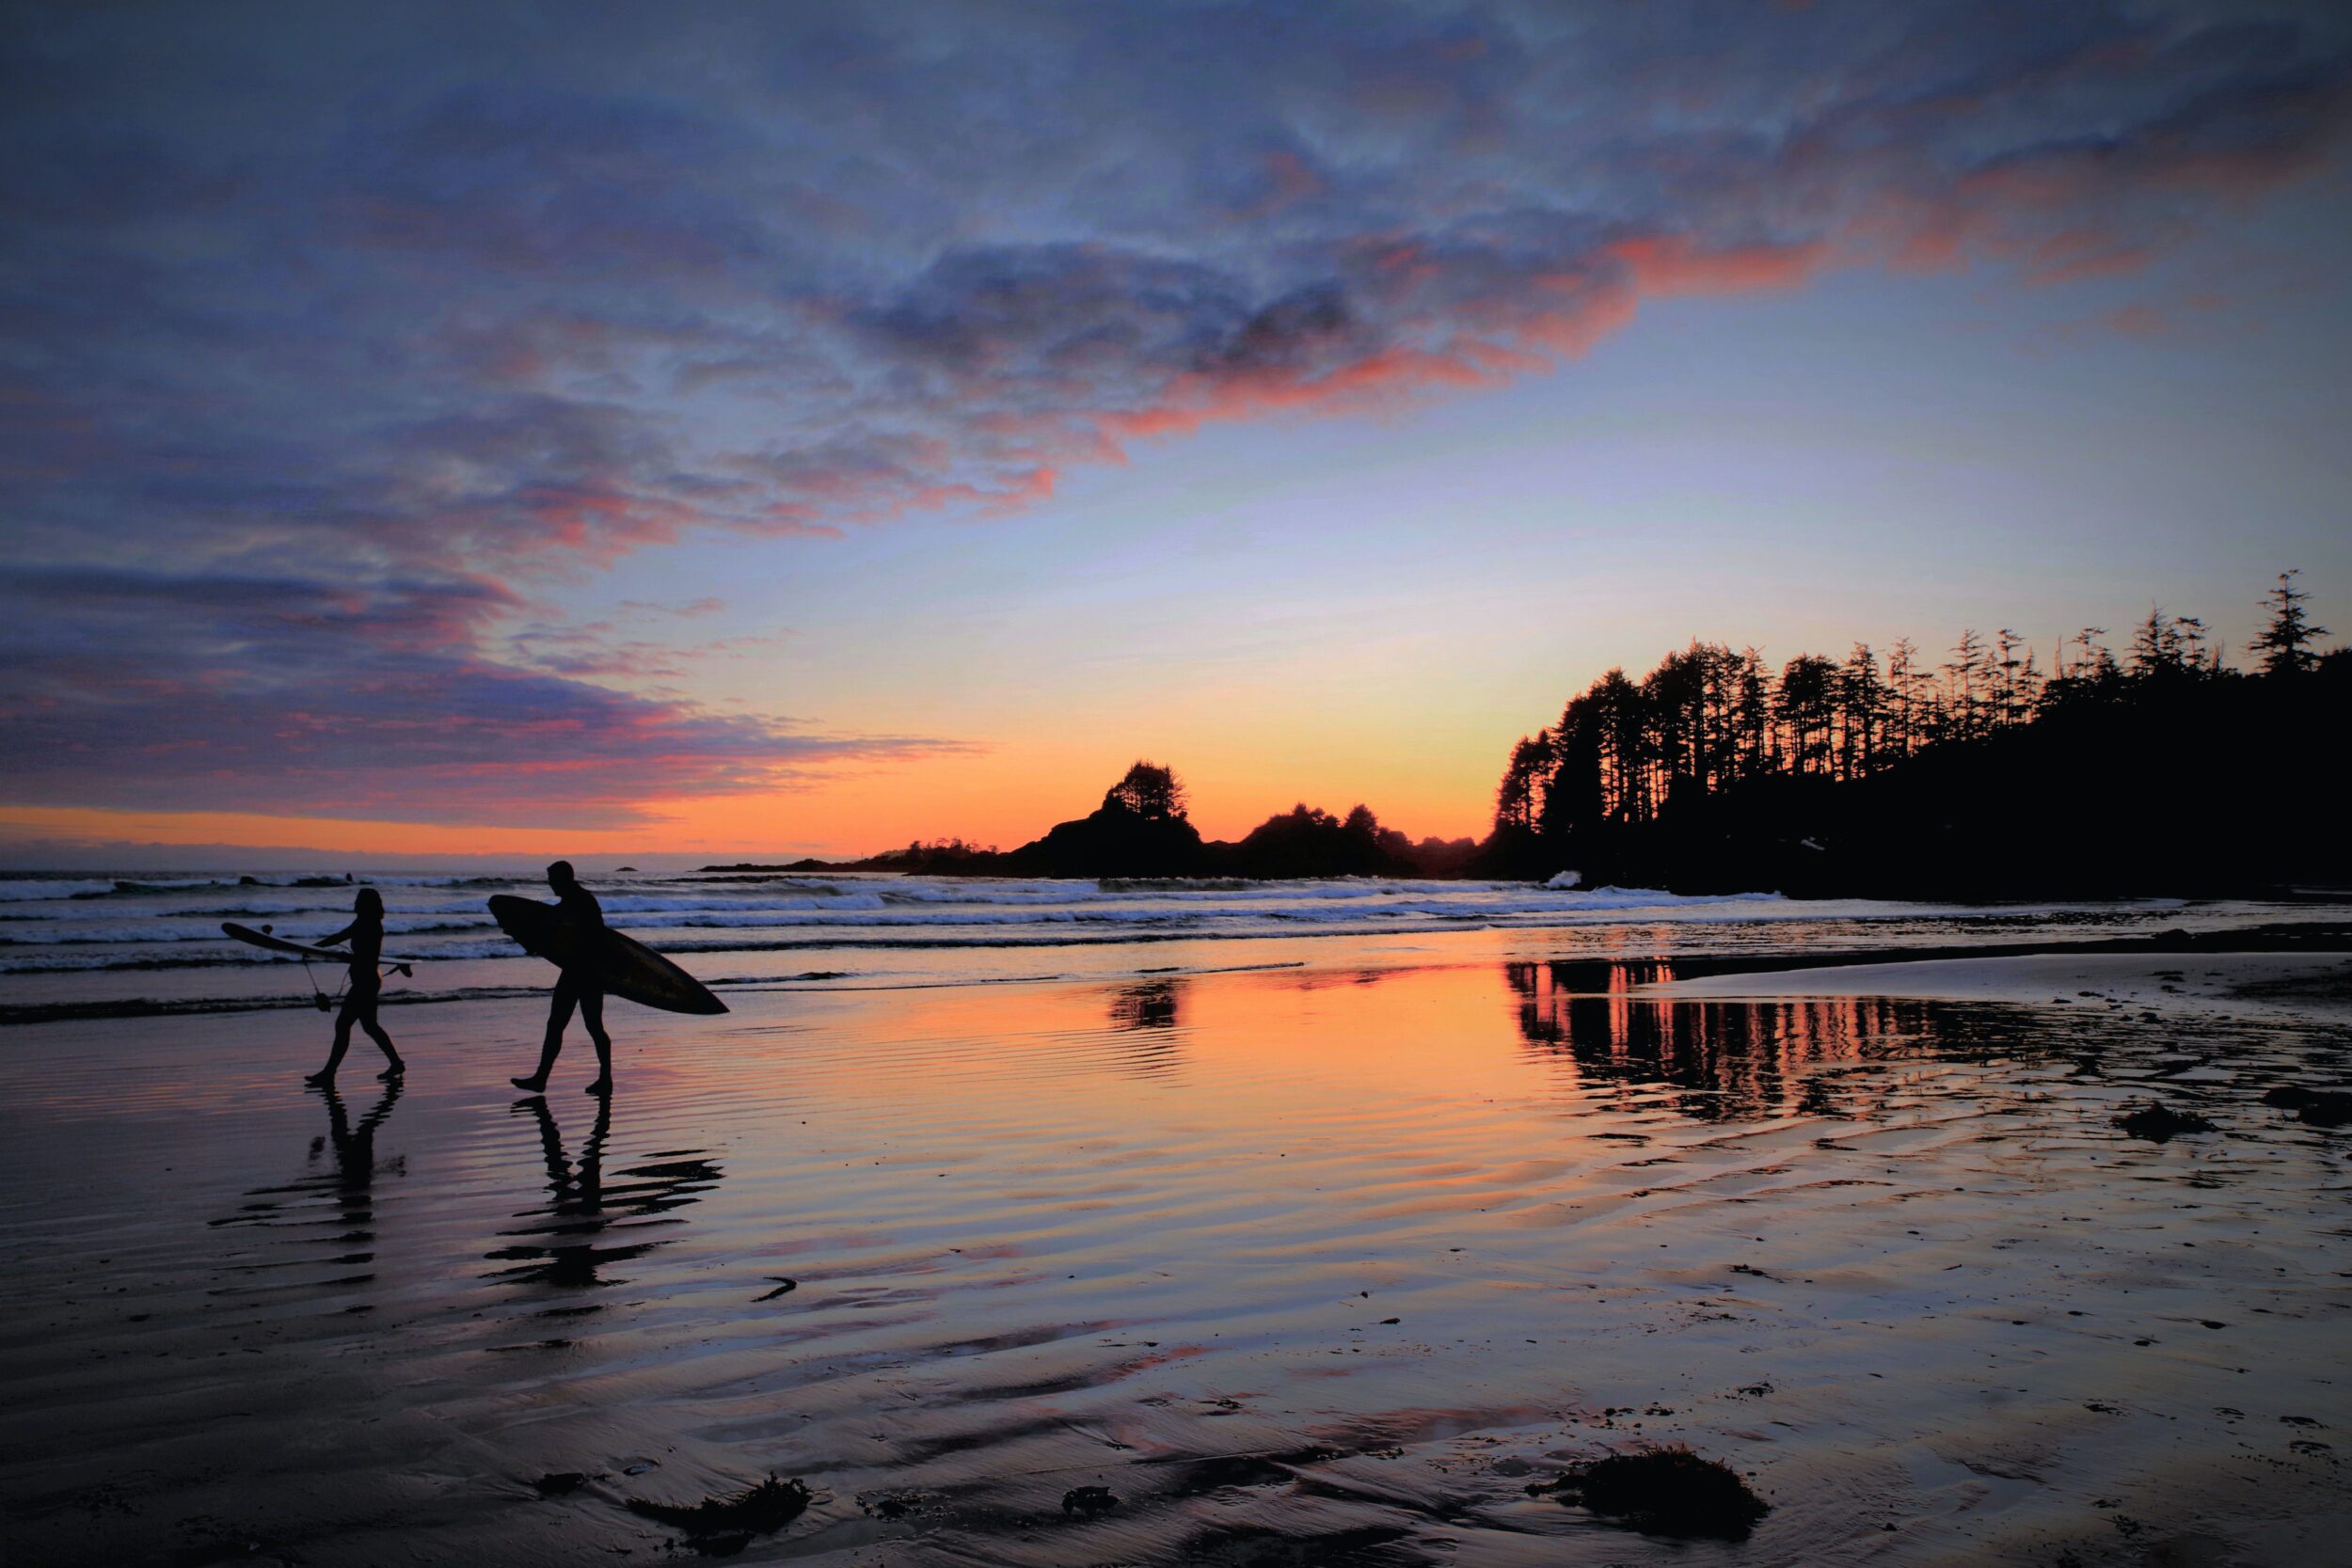 Surfers are photographed at Sunset walking along a beach in Tofino.